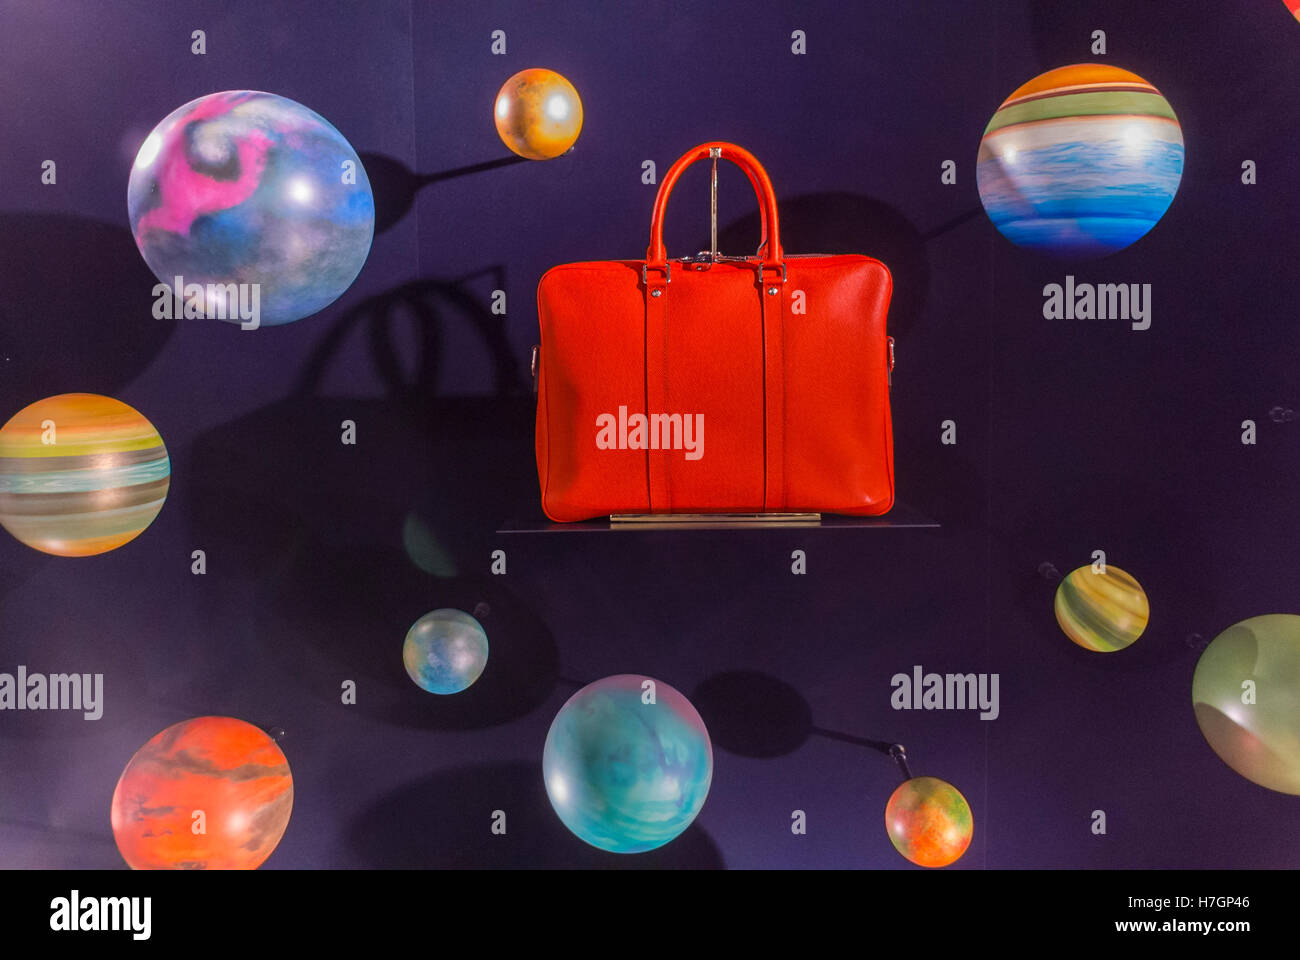 Louis Vuitton Store At Moscow Design With Bag On Snail In Banana Or Moon  Stock Photo - Download Image Now - iStock